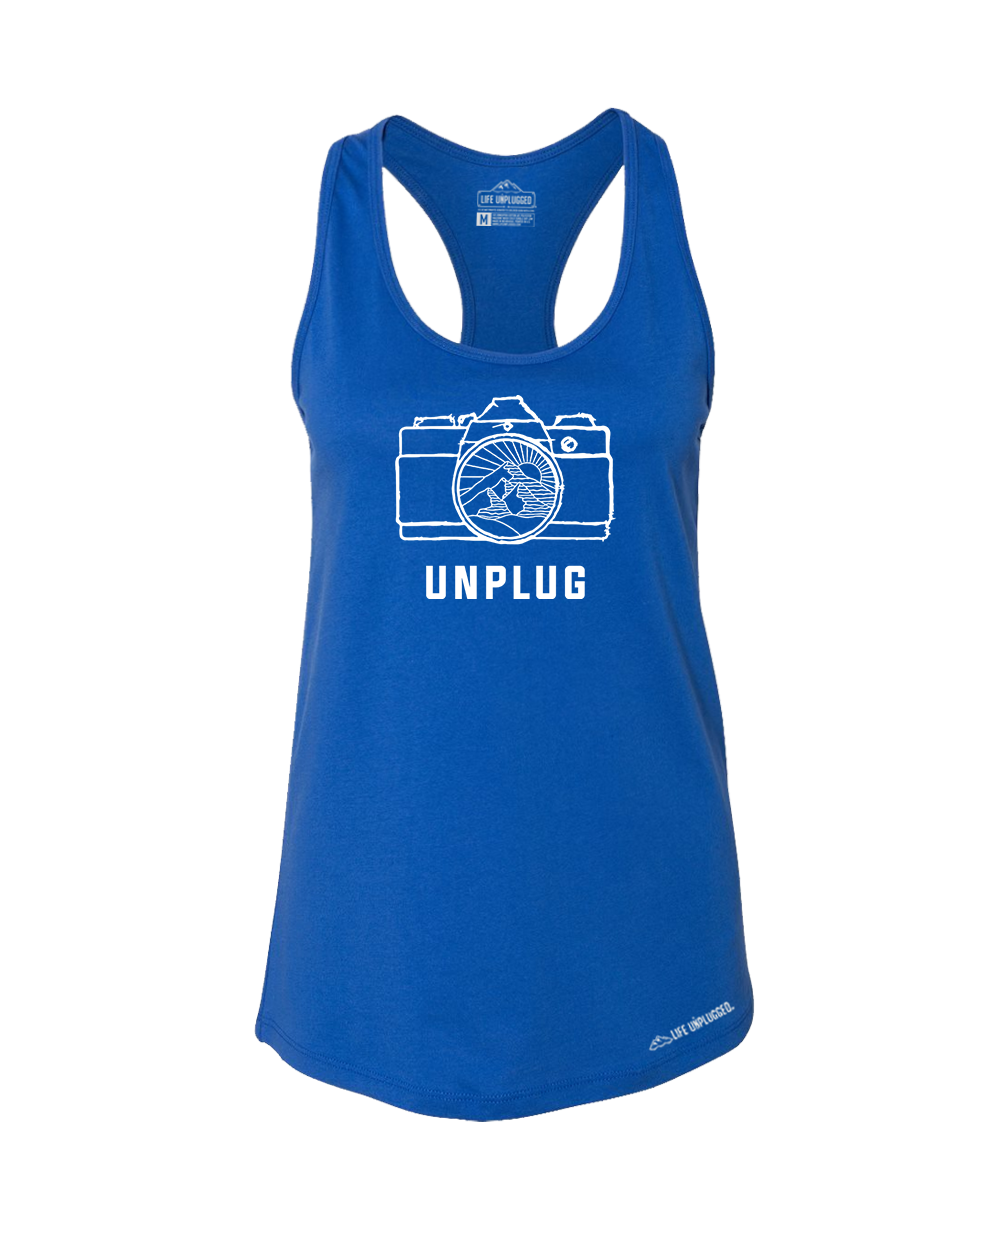 Camera Mountain Lens Premium Women's Relaxed Fit Racerback Tank Top - Life Unplugged